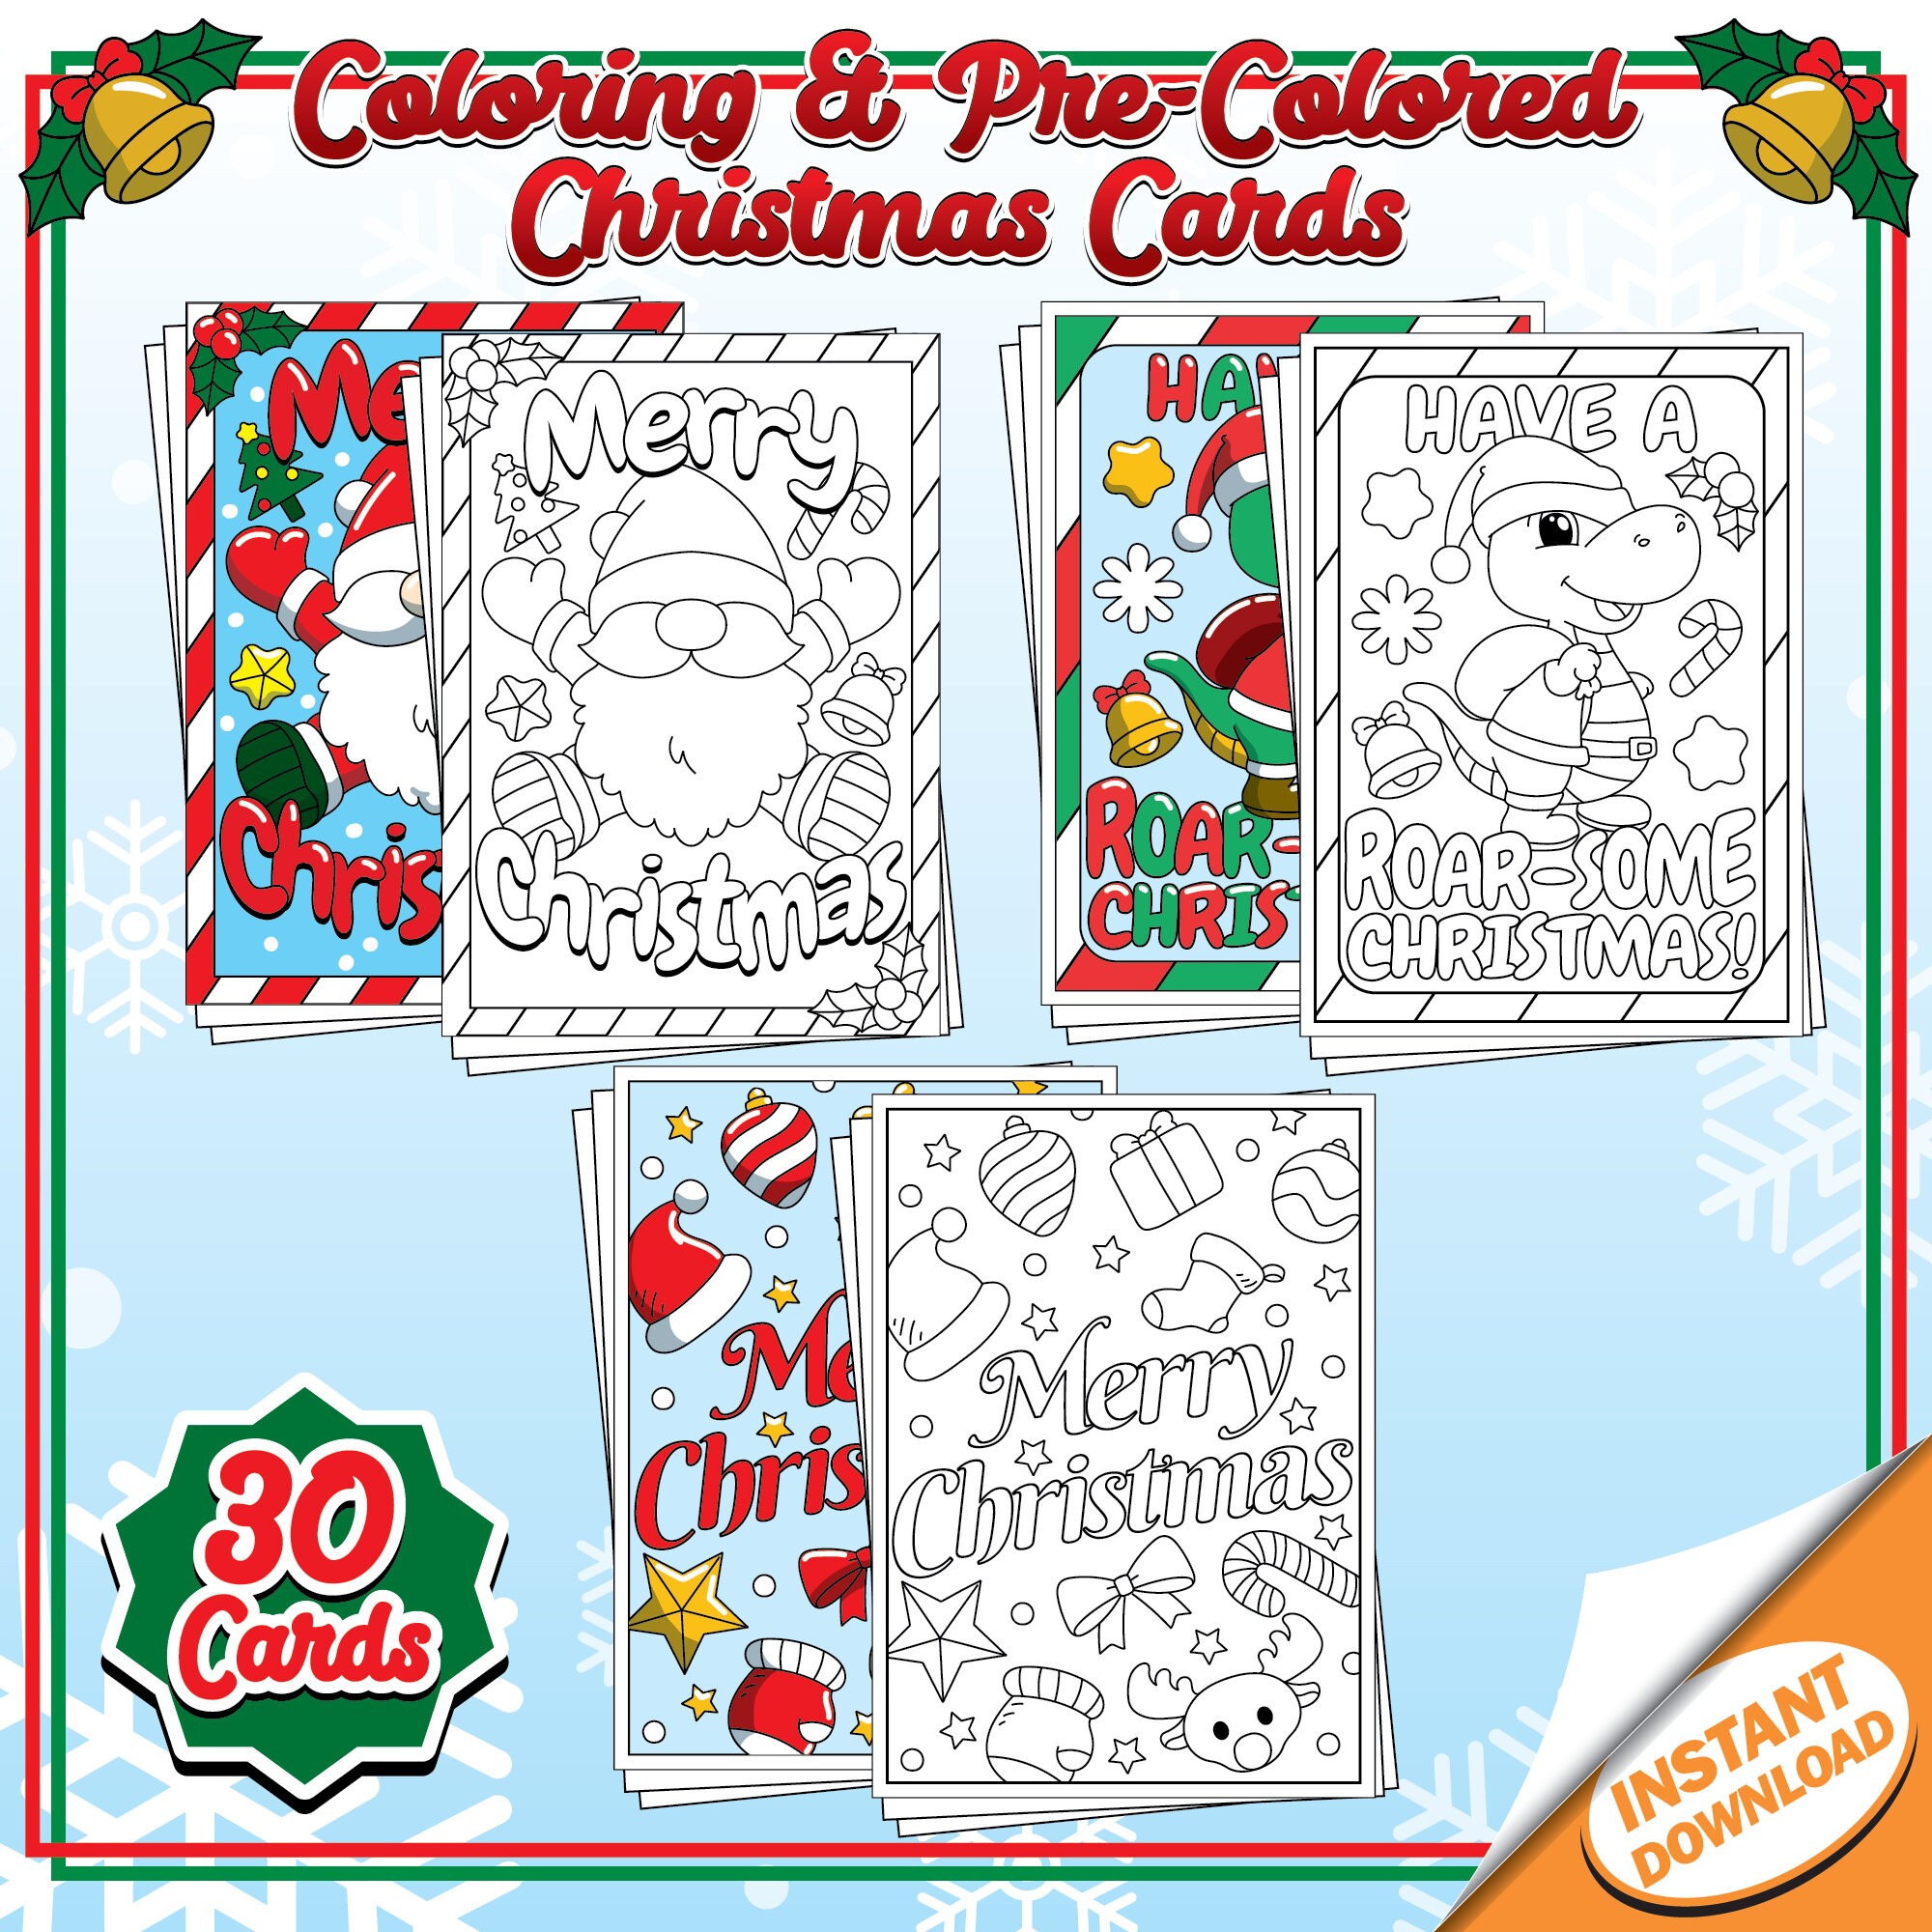 Merry Christmas Coloring Card, Set of 30 Colorable and Colored Holiday Greeting Cards, DIY Festive Printable Instant Digital Download